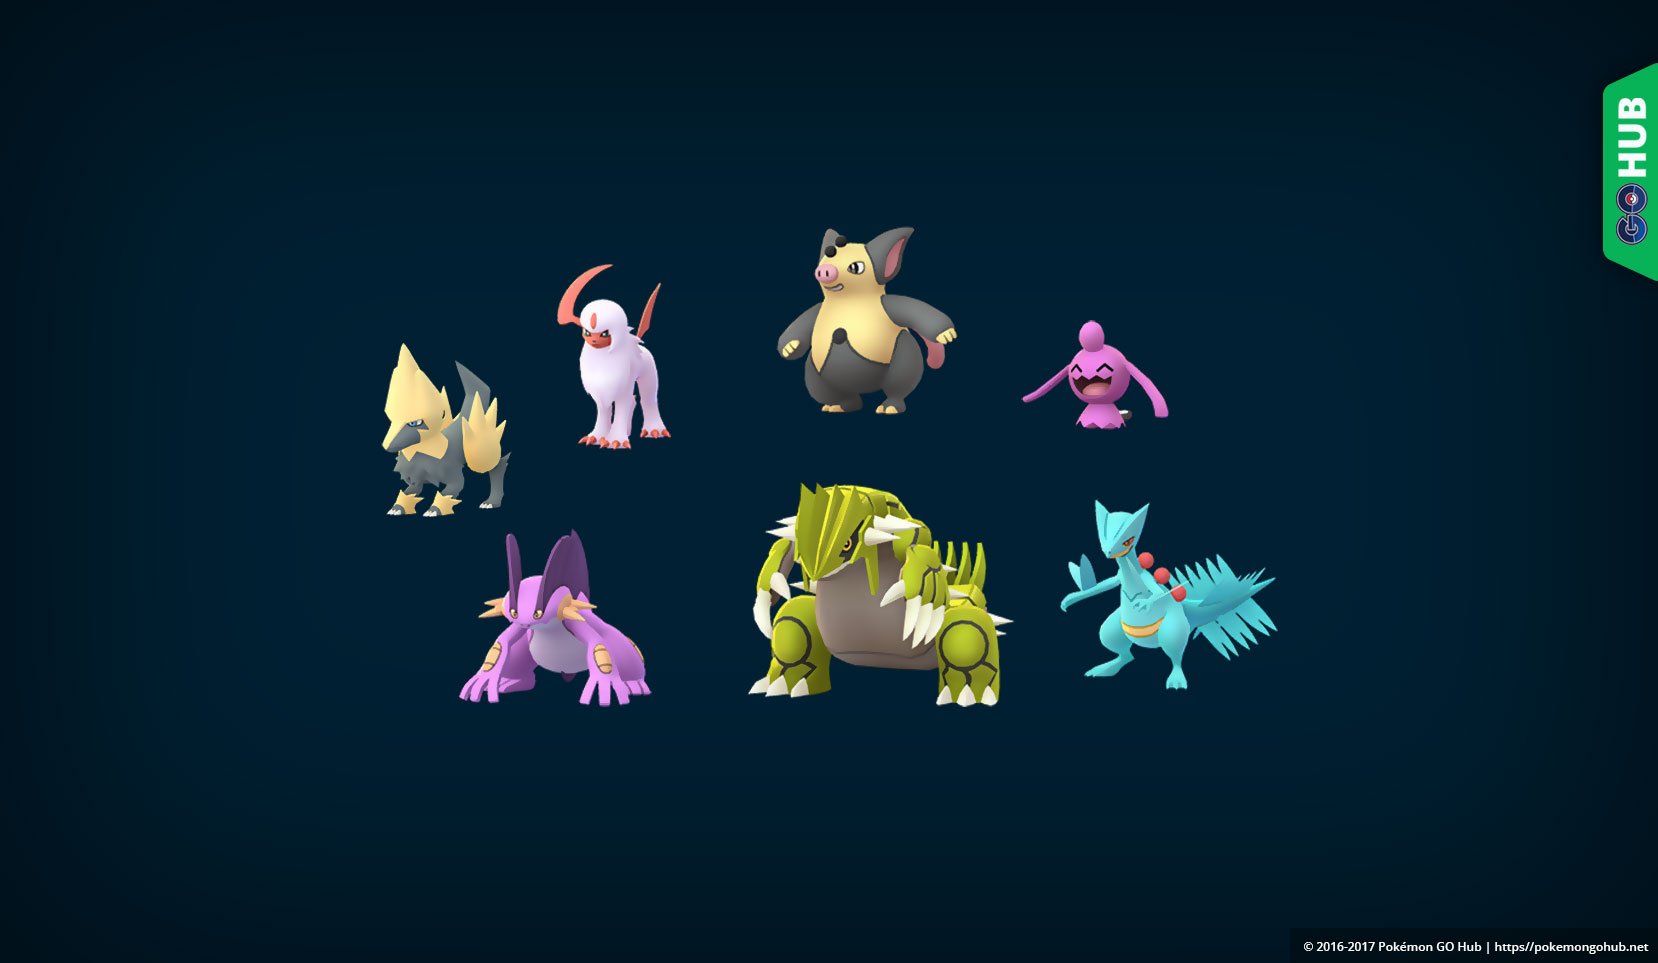 Normal And Shiny Sprites For Released Gen 3 Pokemon Groudon